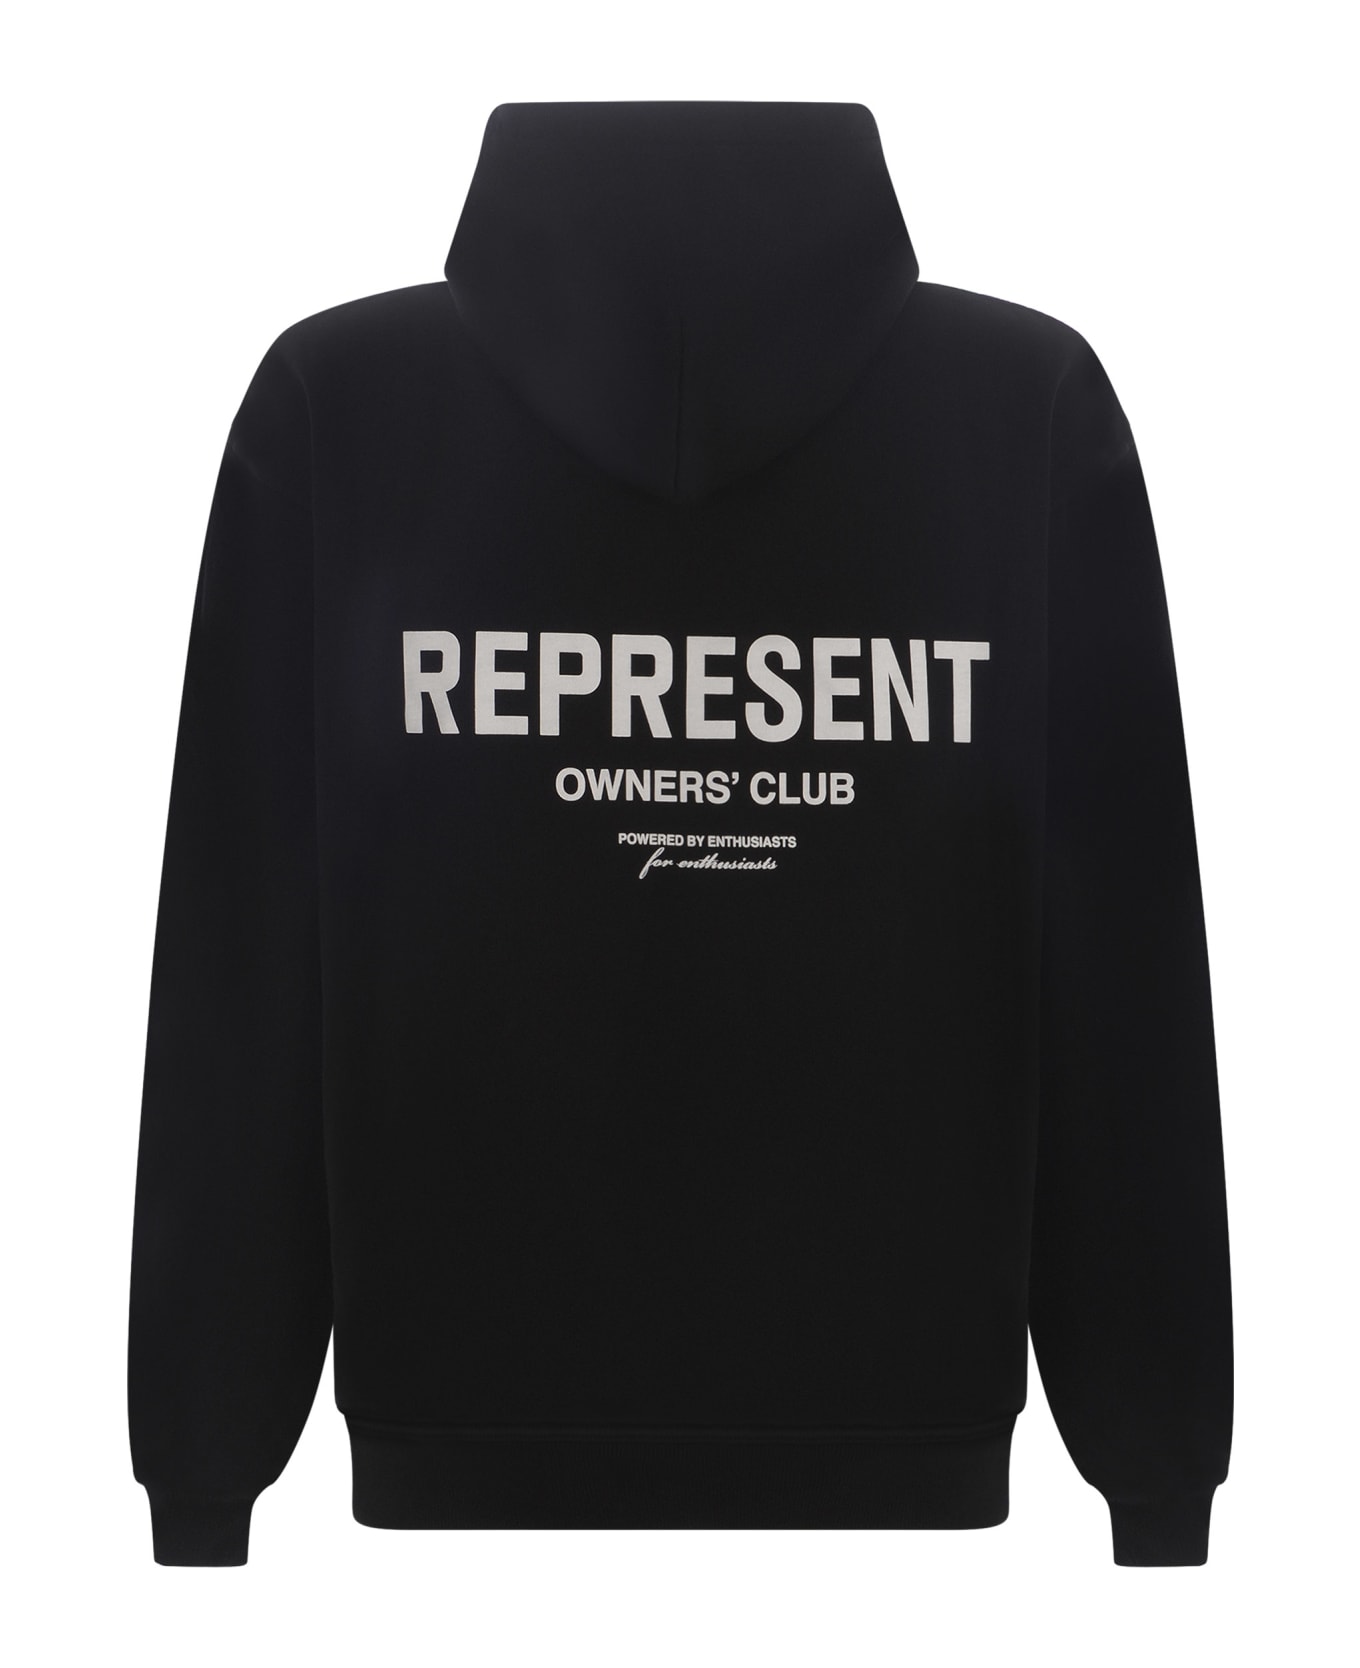 REPRESENT Hooded Sweatshirt Represent "owners' Club" In Cotton - Nero